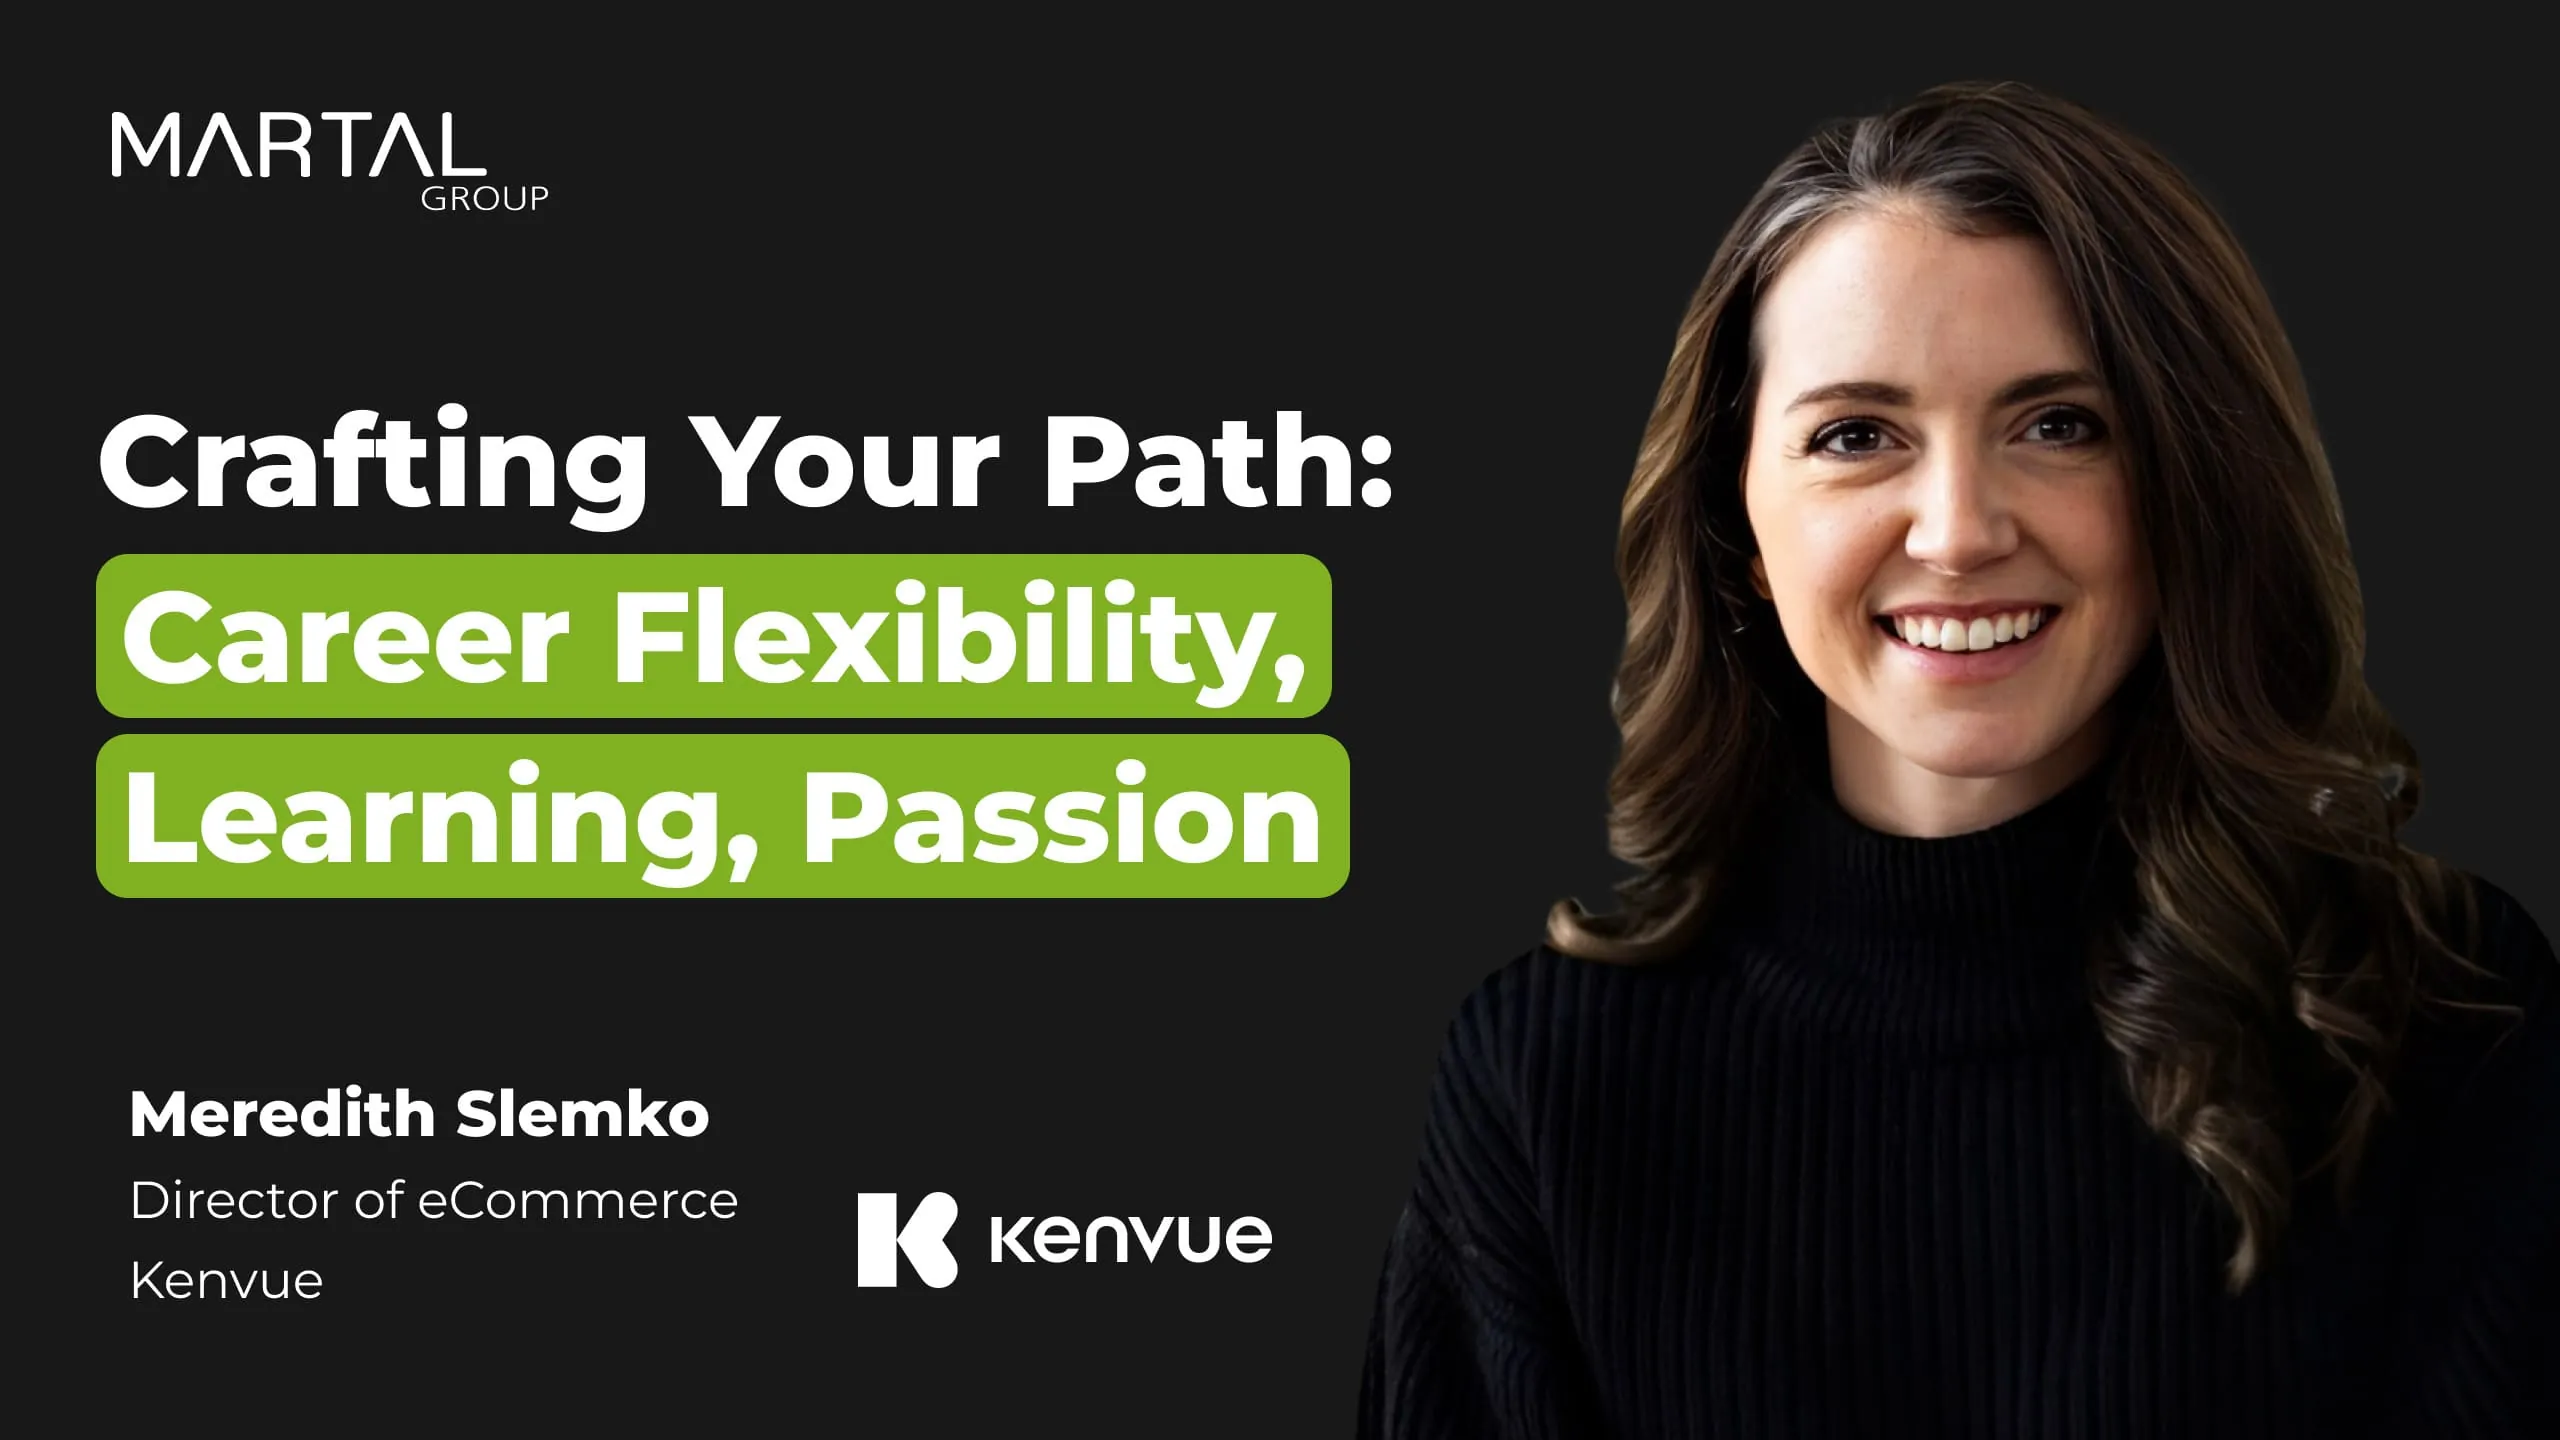 Meredith Slemko's Pathway: Pioneering Success and Growth in Sales